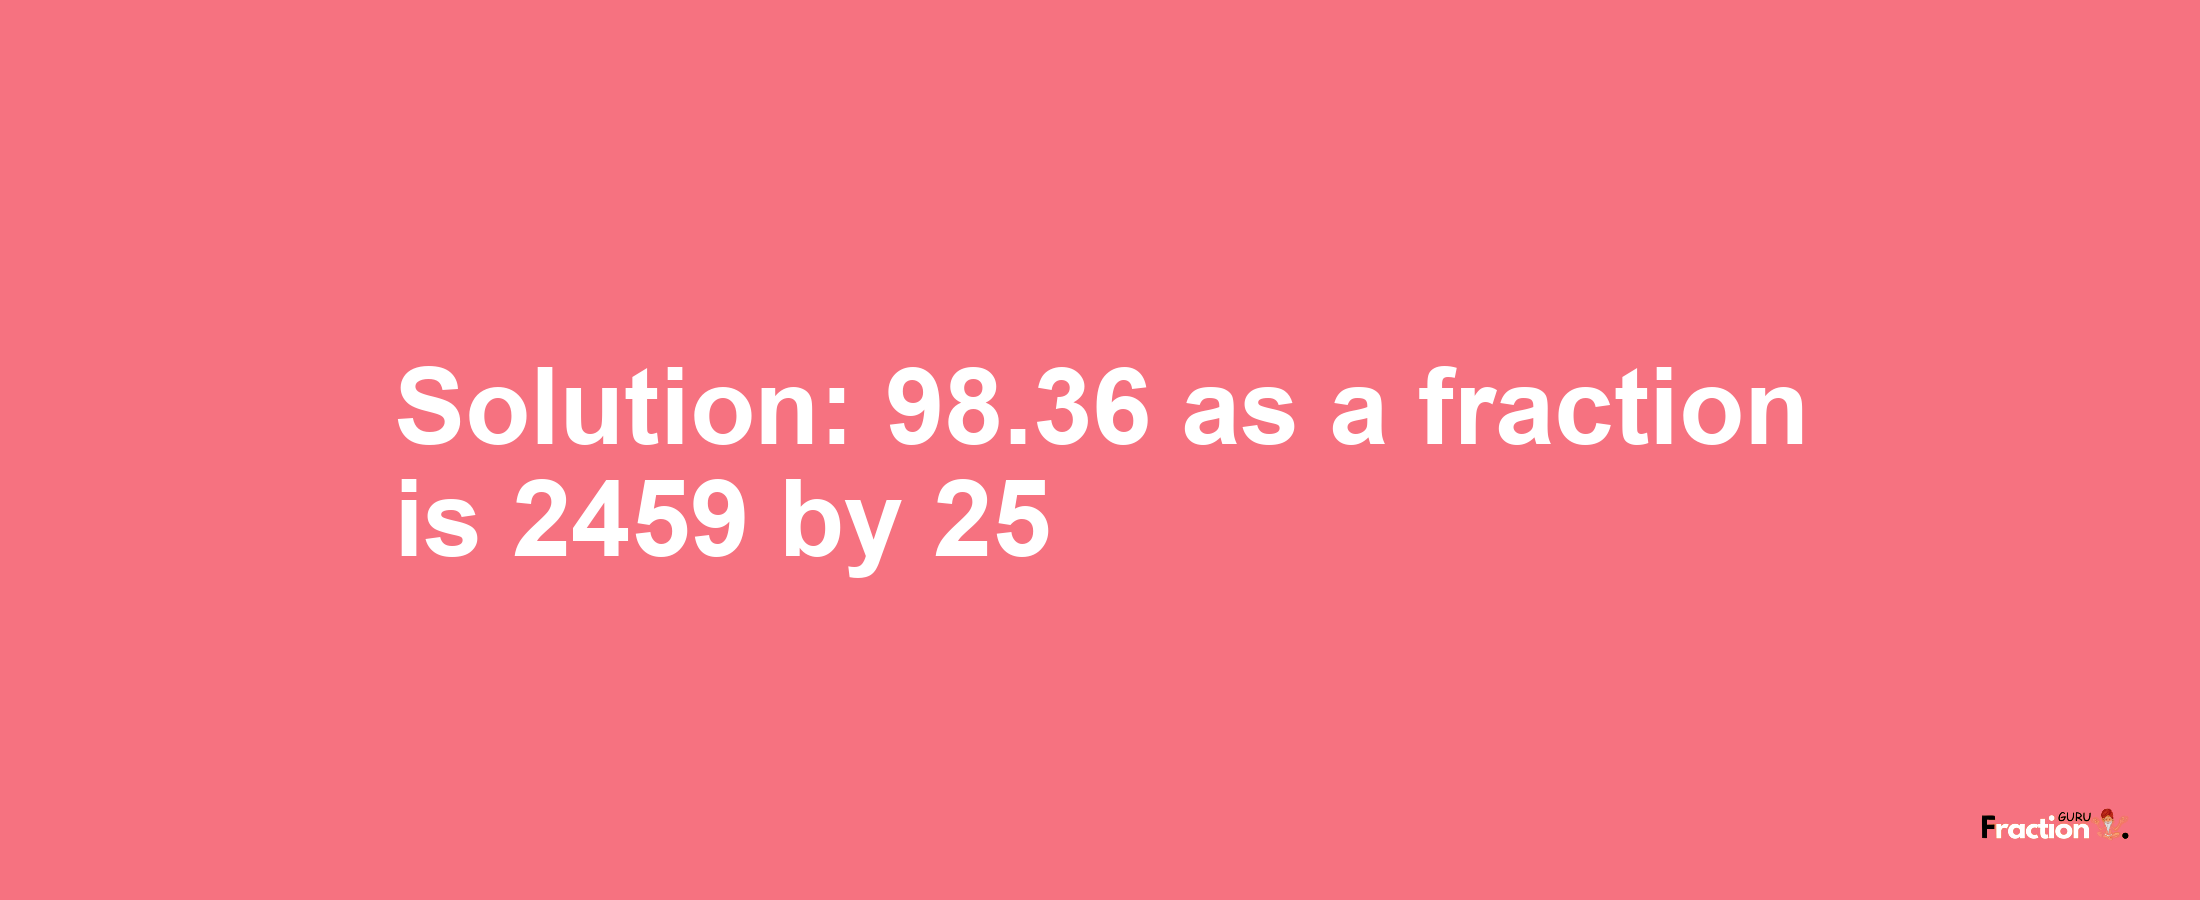 Solution:98.36 as a fraction is 2459/25